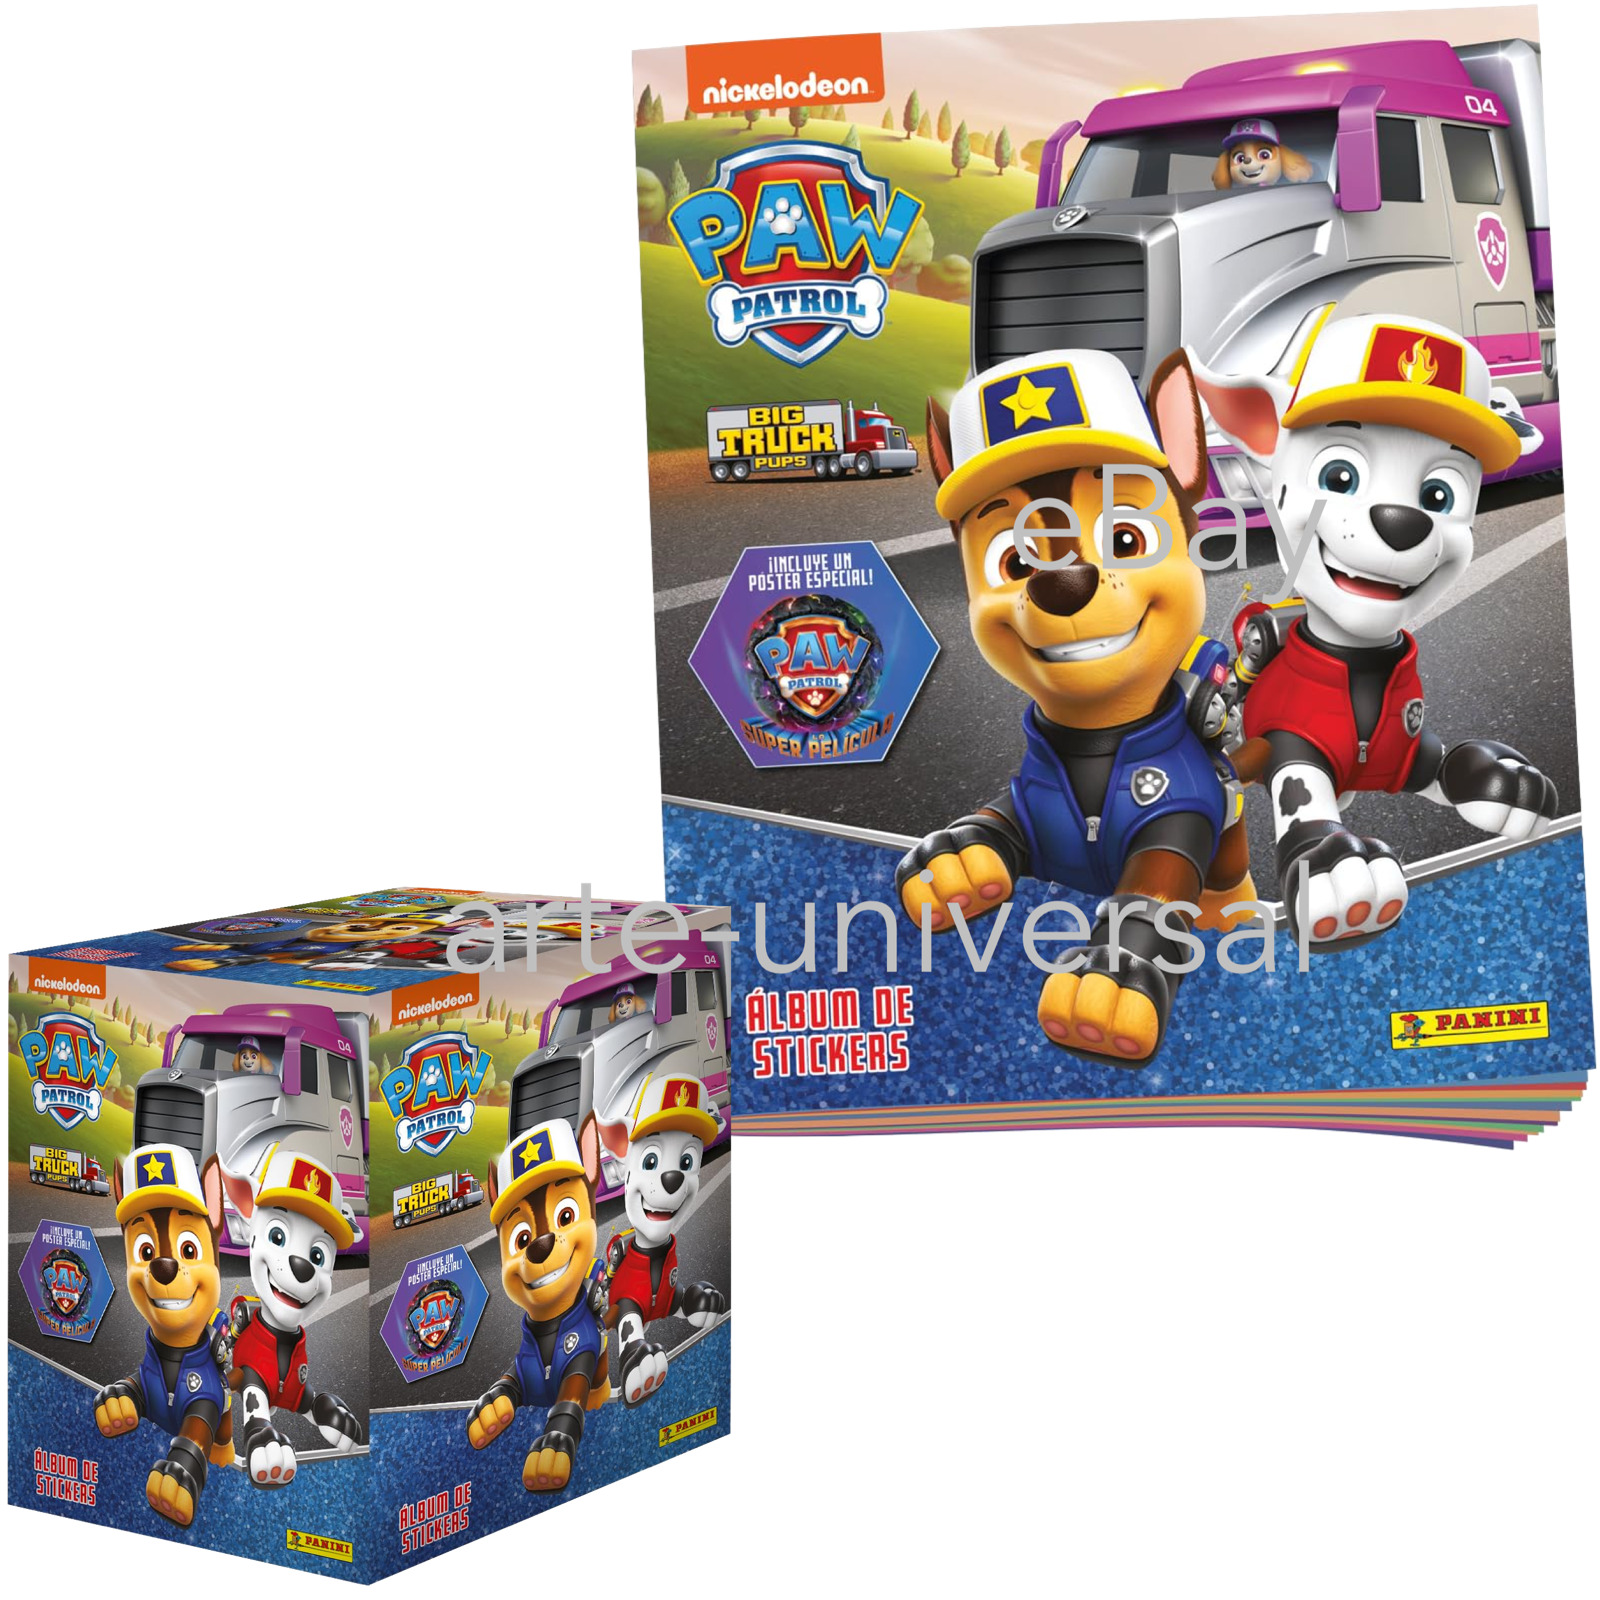 ALBUM + BOX 250 Stickers Panini Collection Paw Patrol Rescue Knights Nickelodeon